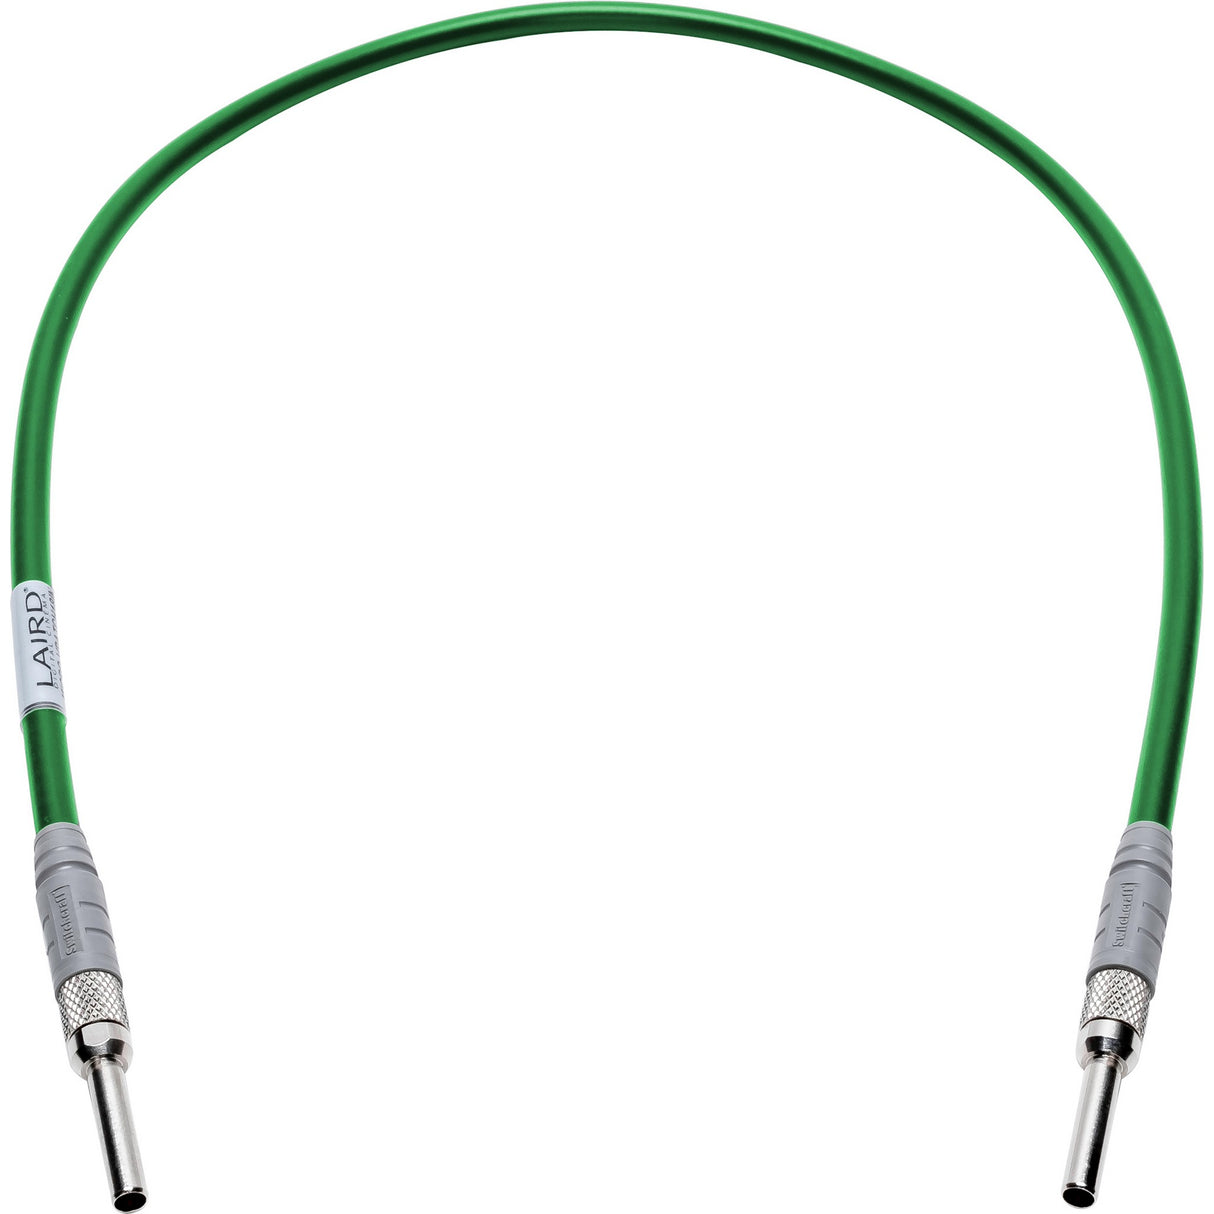 Laird MICRO-VPATCH-006GN 12G-SDI Micro Video Patch Cable, Military Green, 6-Feet